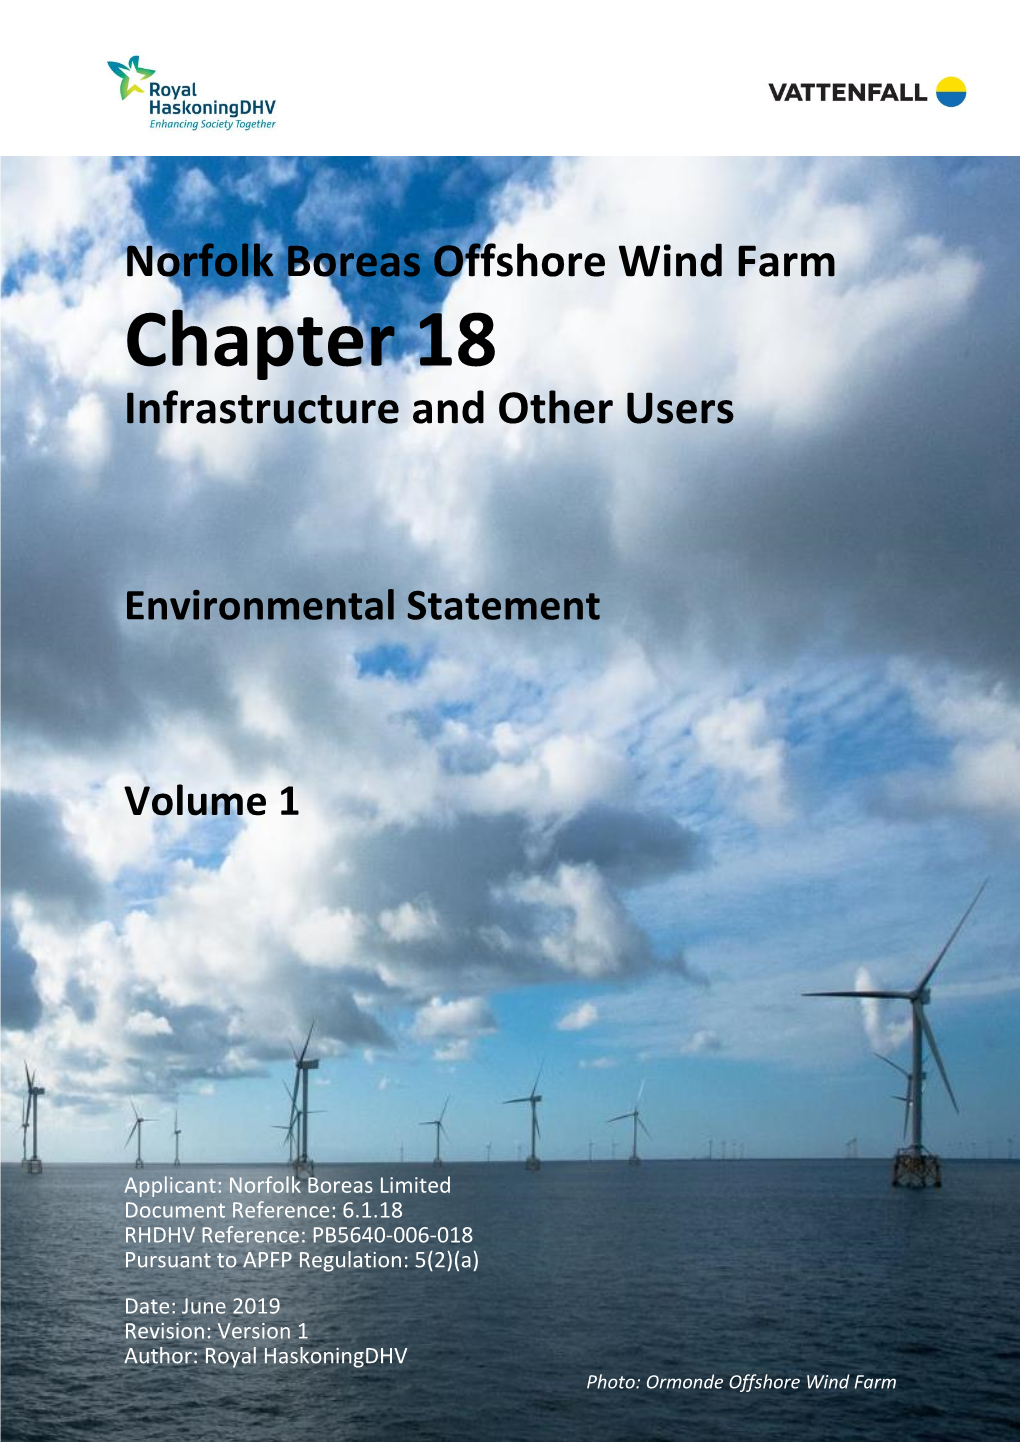 Norfolk Boreas Offshore Wind Farm Chapter 18 Infrastructure and Other Users